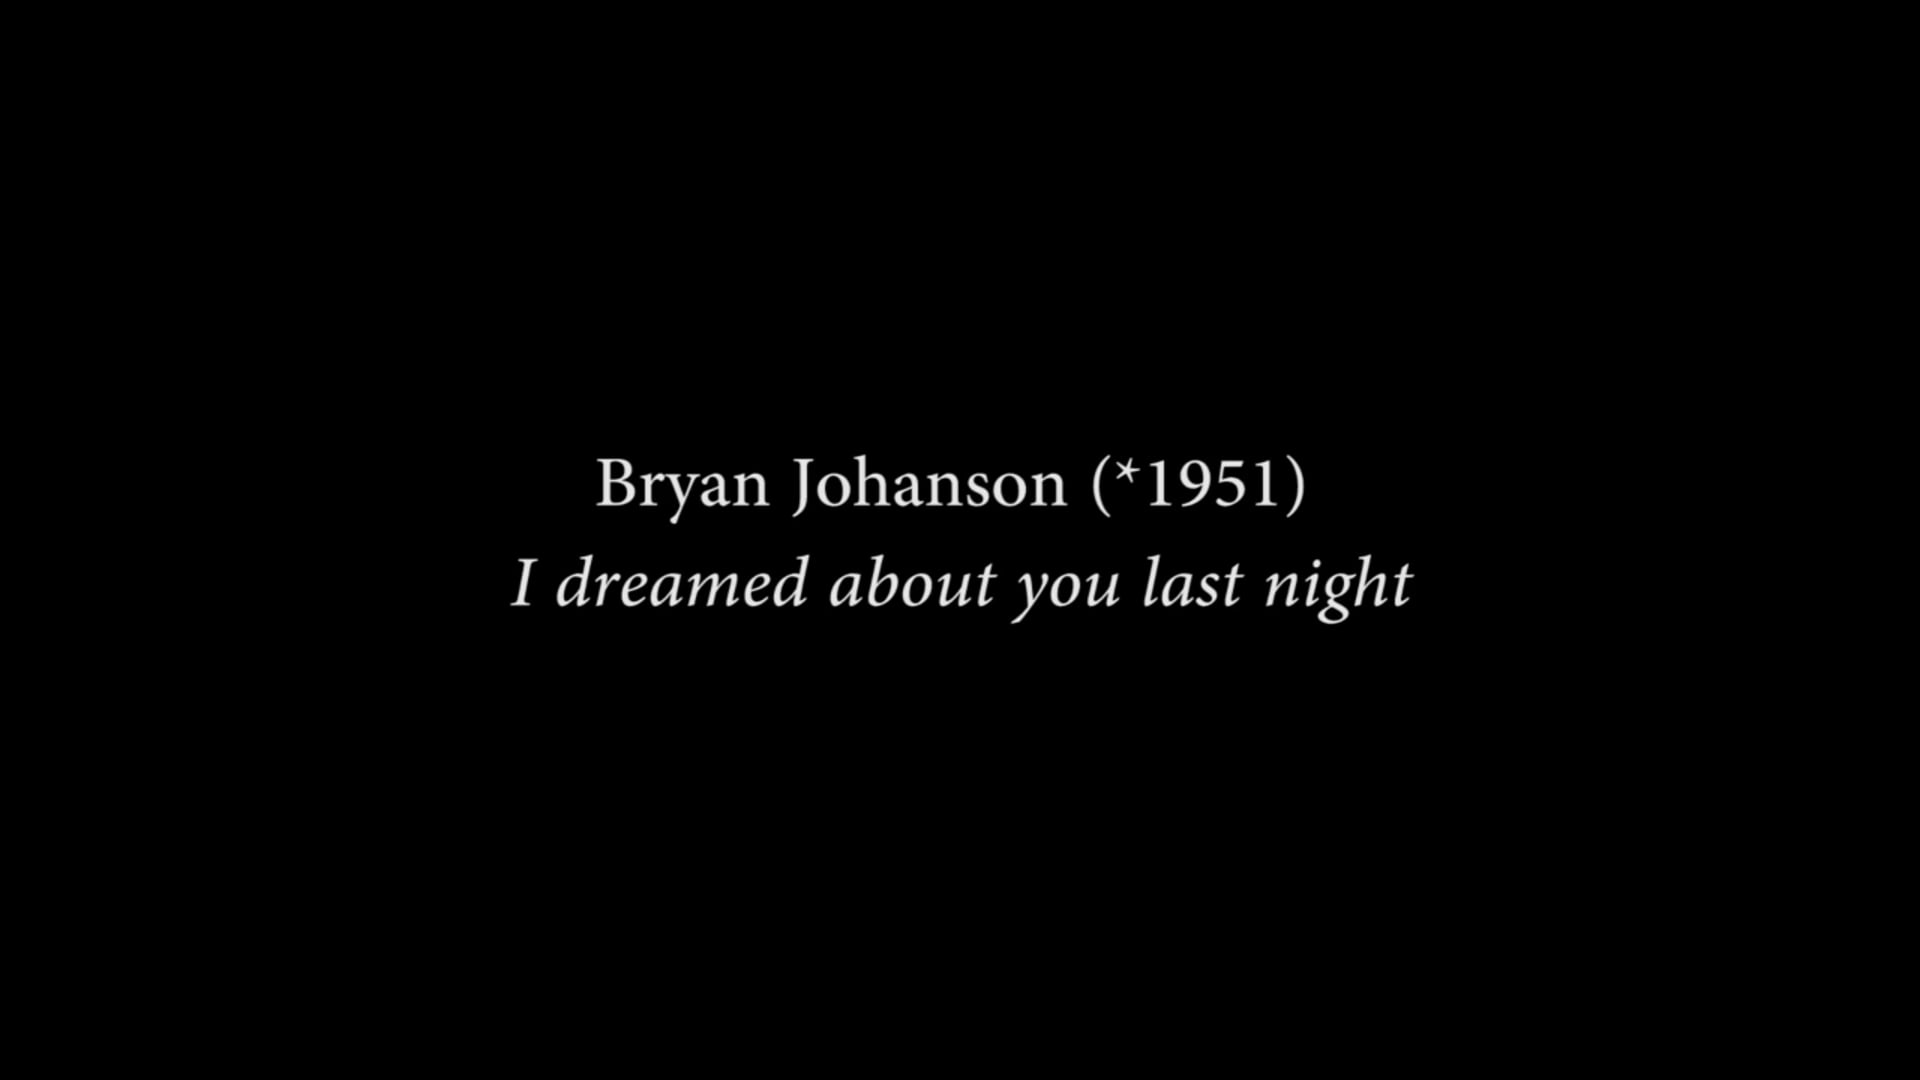 Bryan Johanson - I dreamed about you last night - performed by Michael Neumann